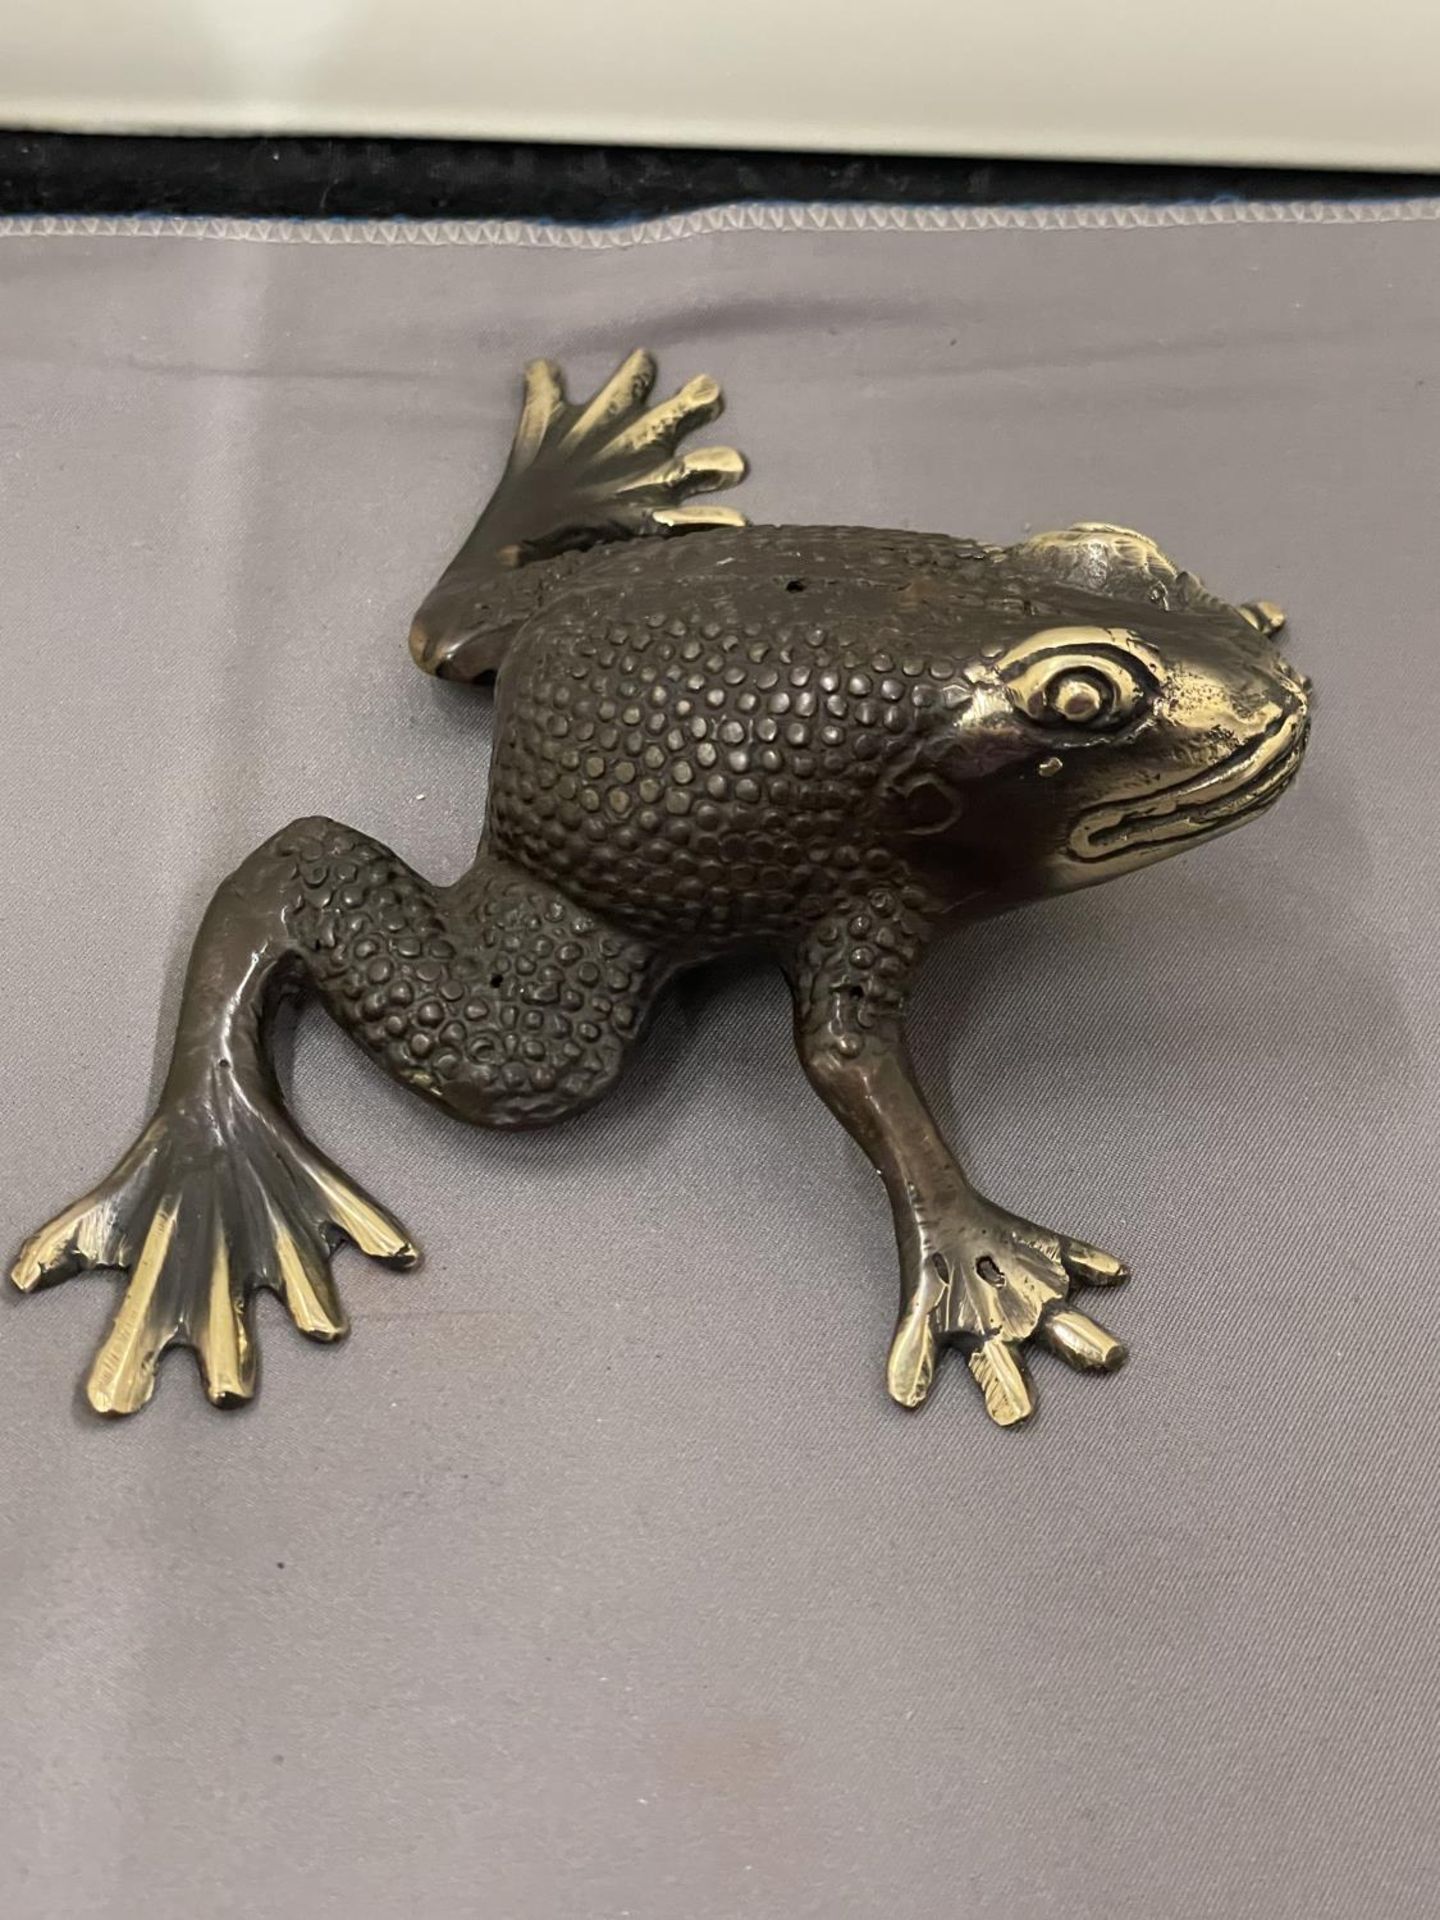 A BRONZE FIGURE OF A FROG - Image 3 of 6